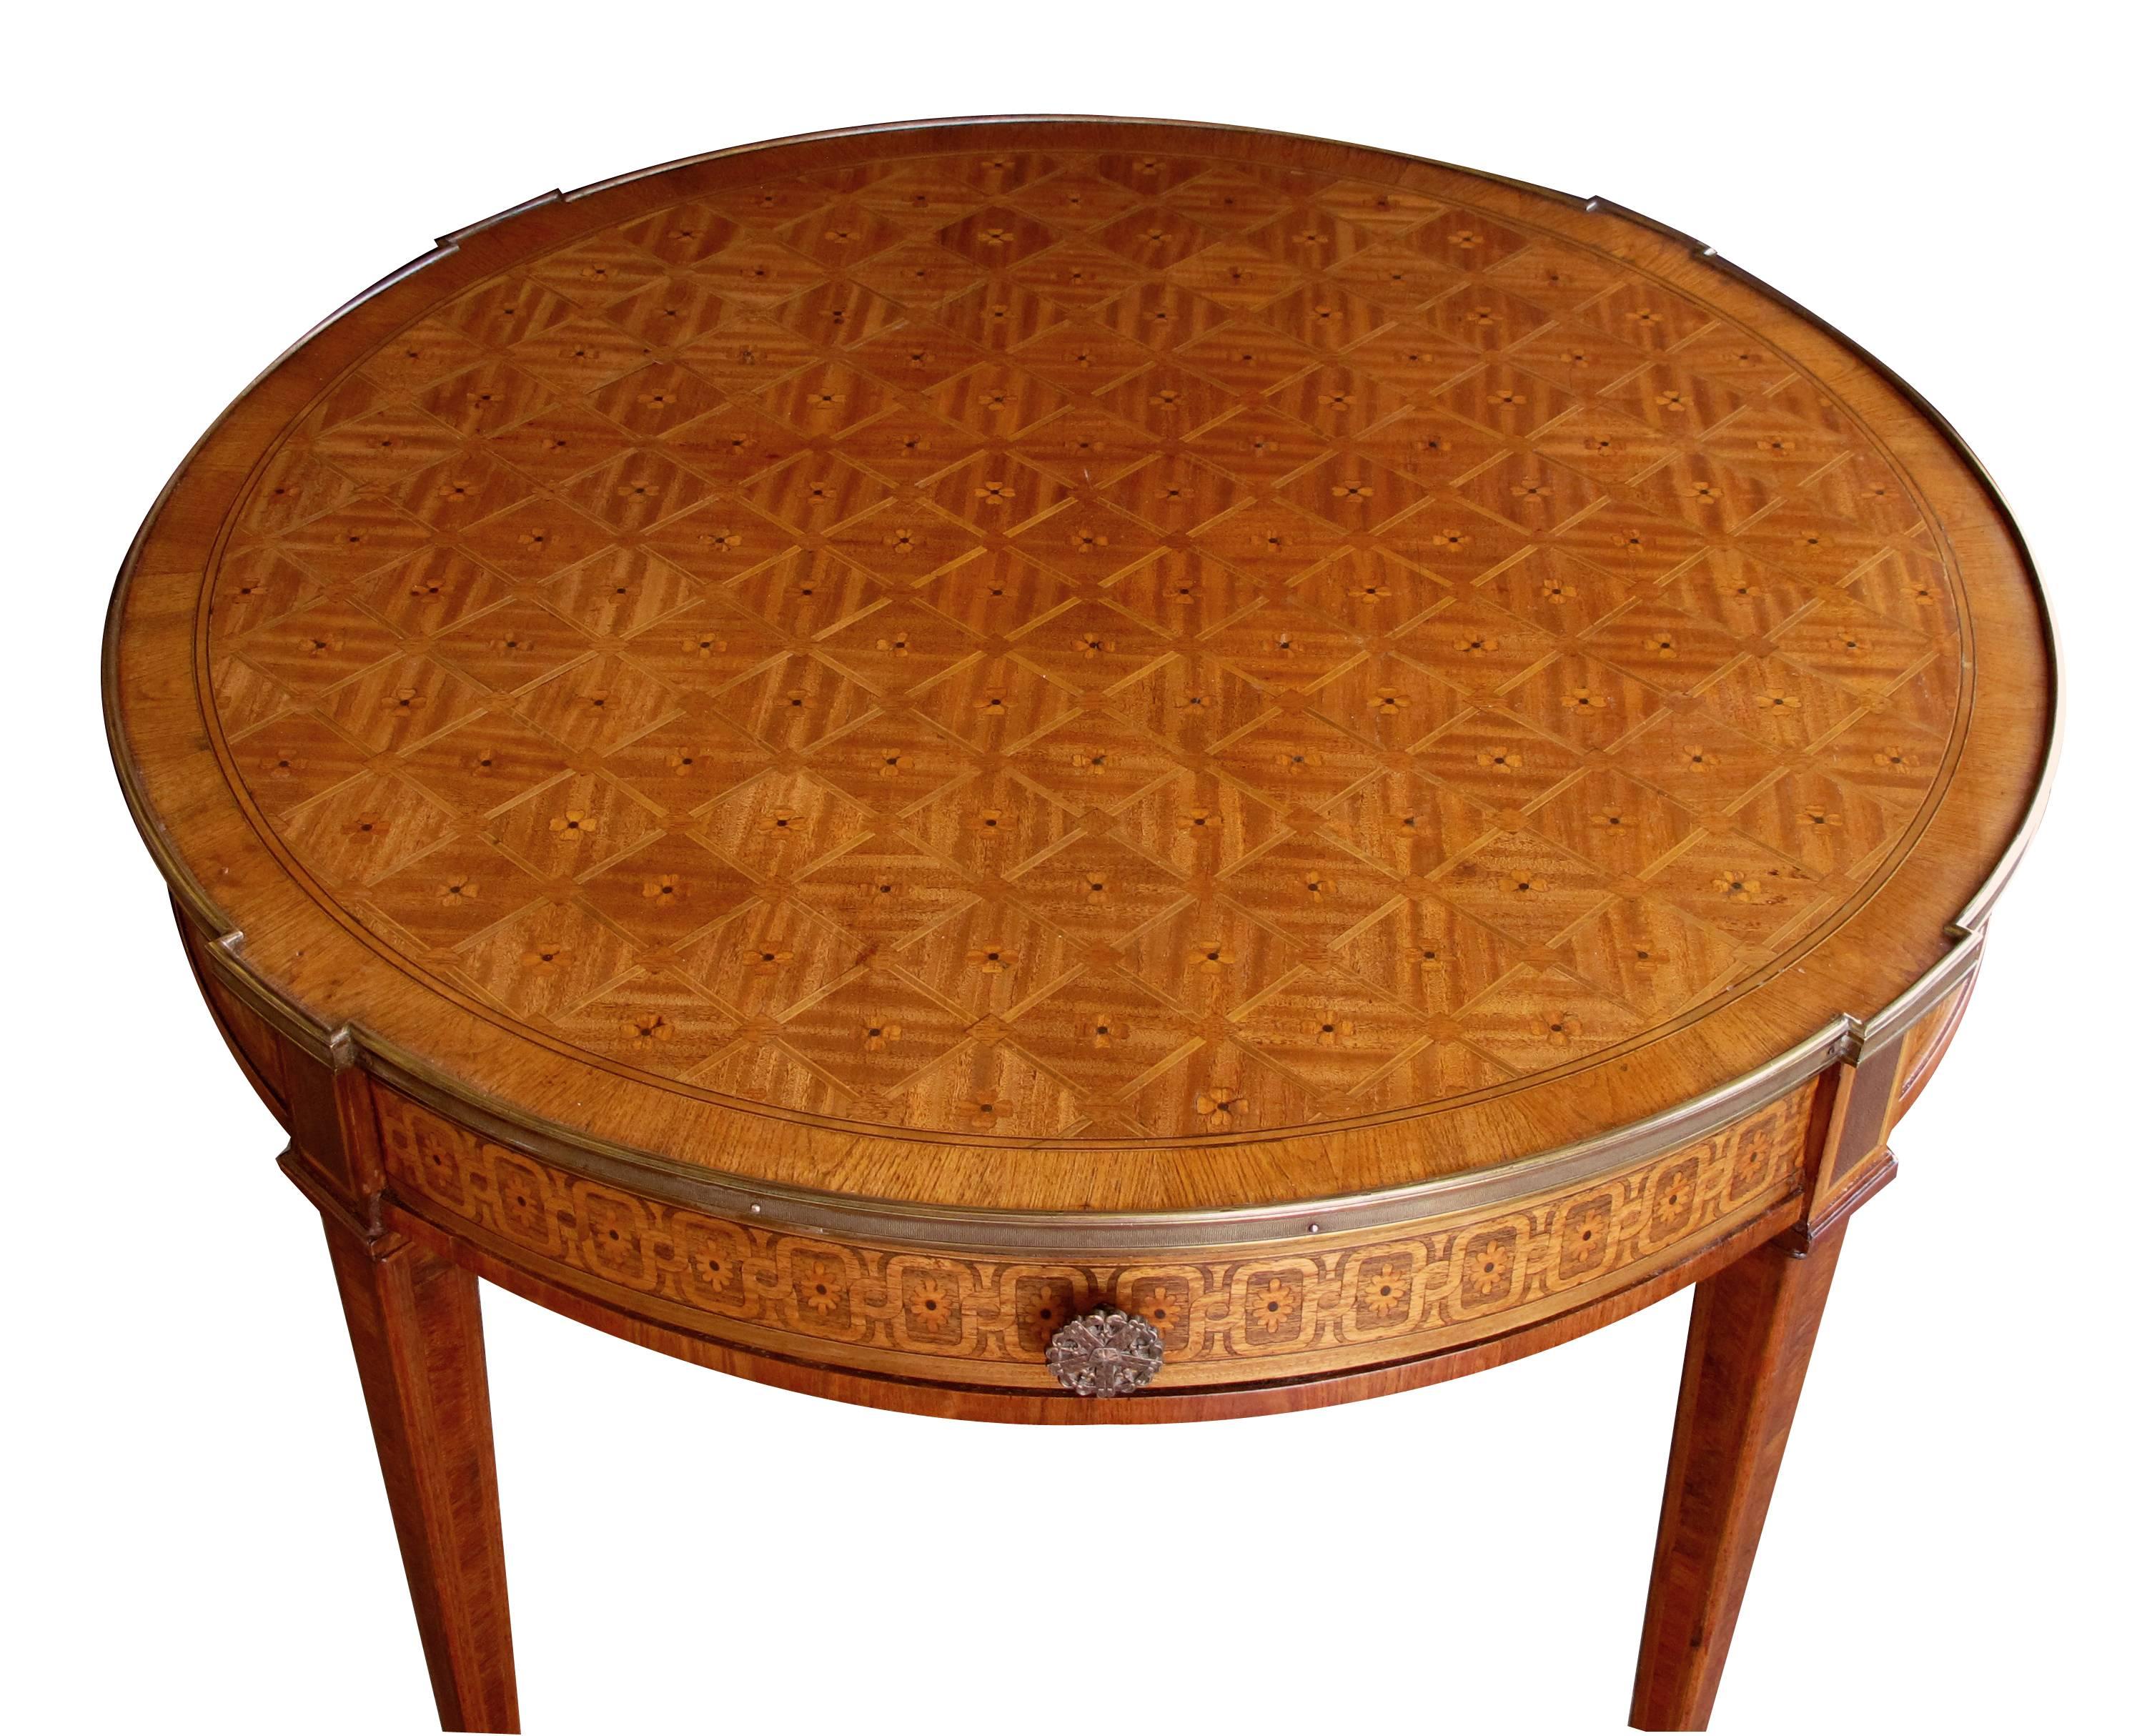 An elegant and good quality French Louis XVI style tiger mahogany and kingwood parquetry and marquetry inlaid circular bouillotte table; the circular top with diamond and floral inlay marquetry above an inlaid apron fitted with a single drawer;